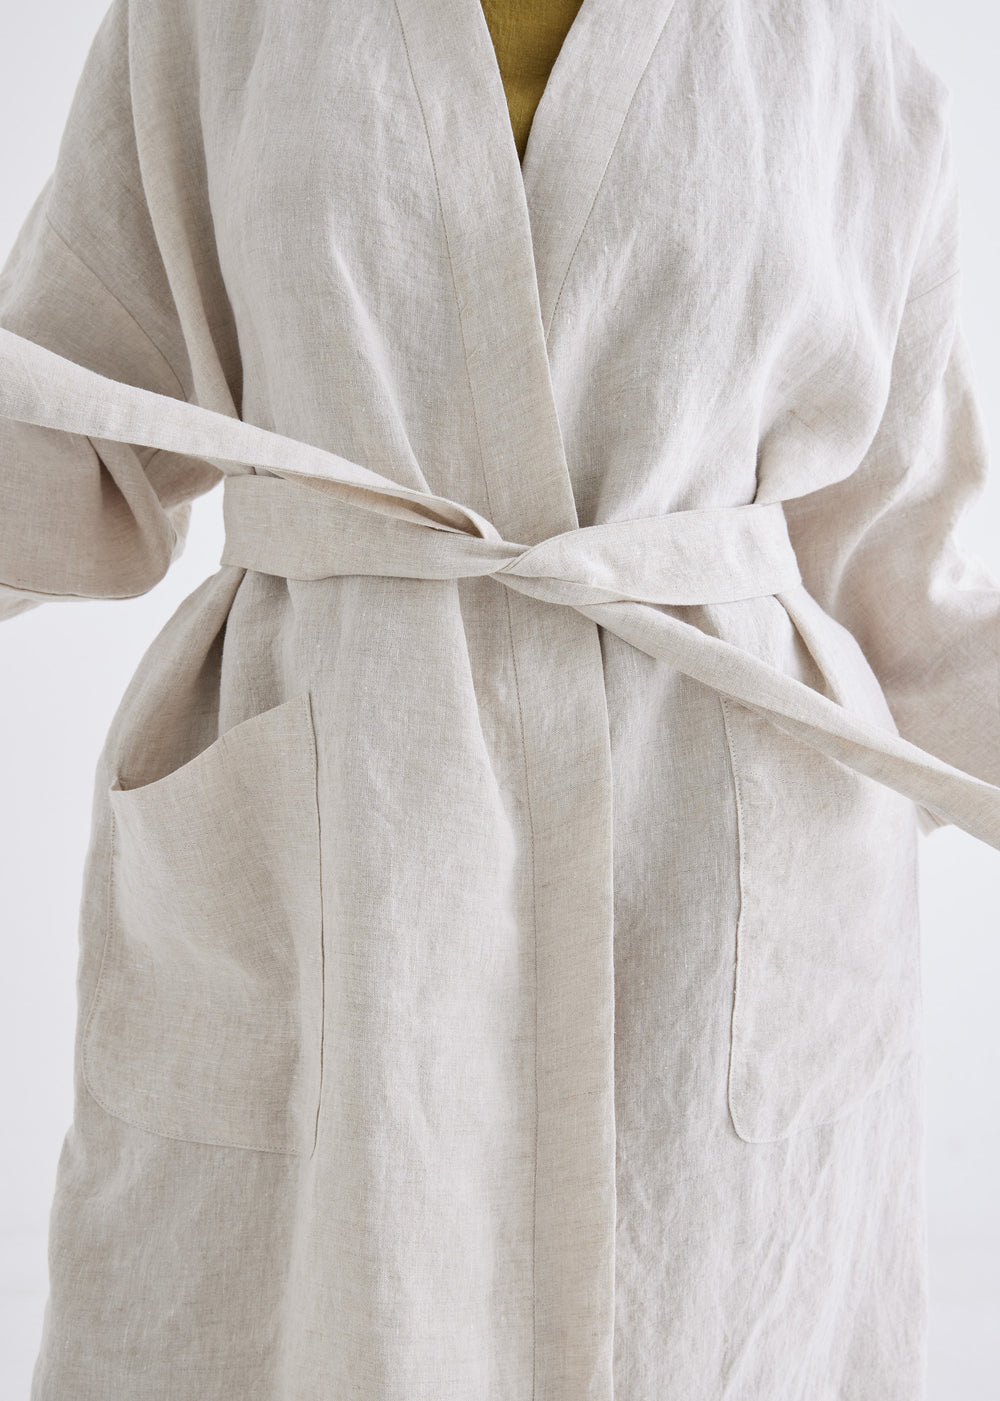 Linen Robe in Natural